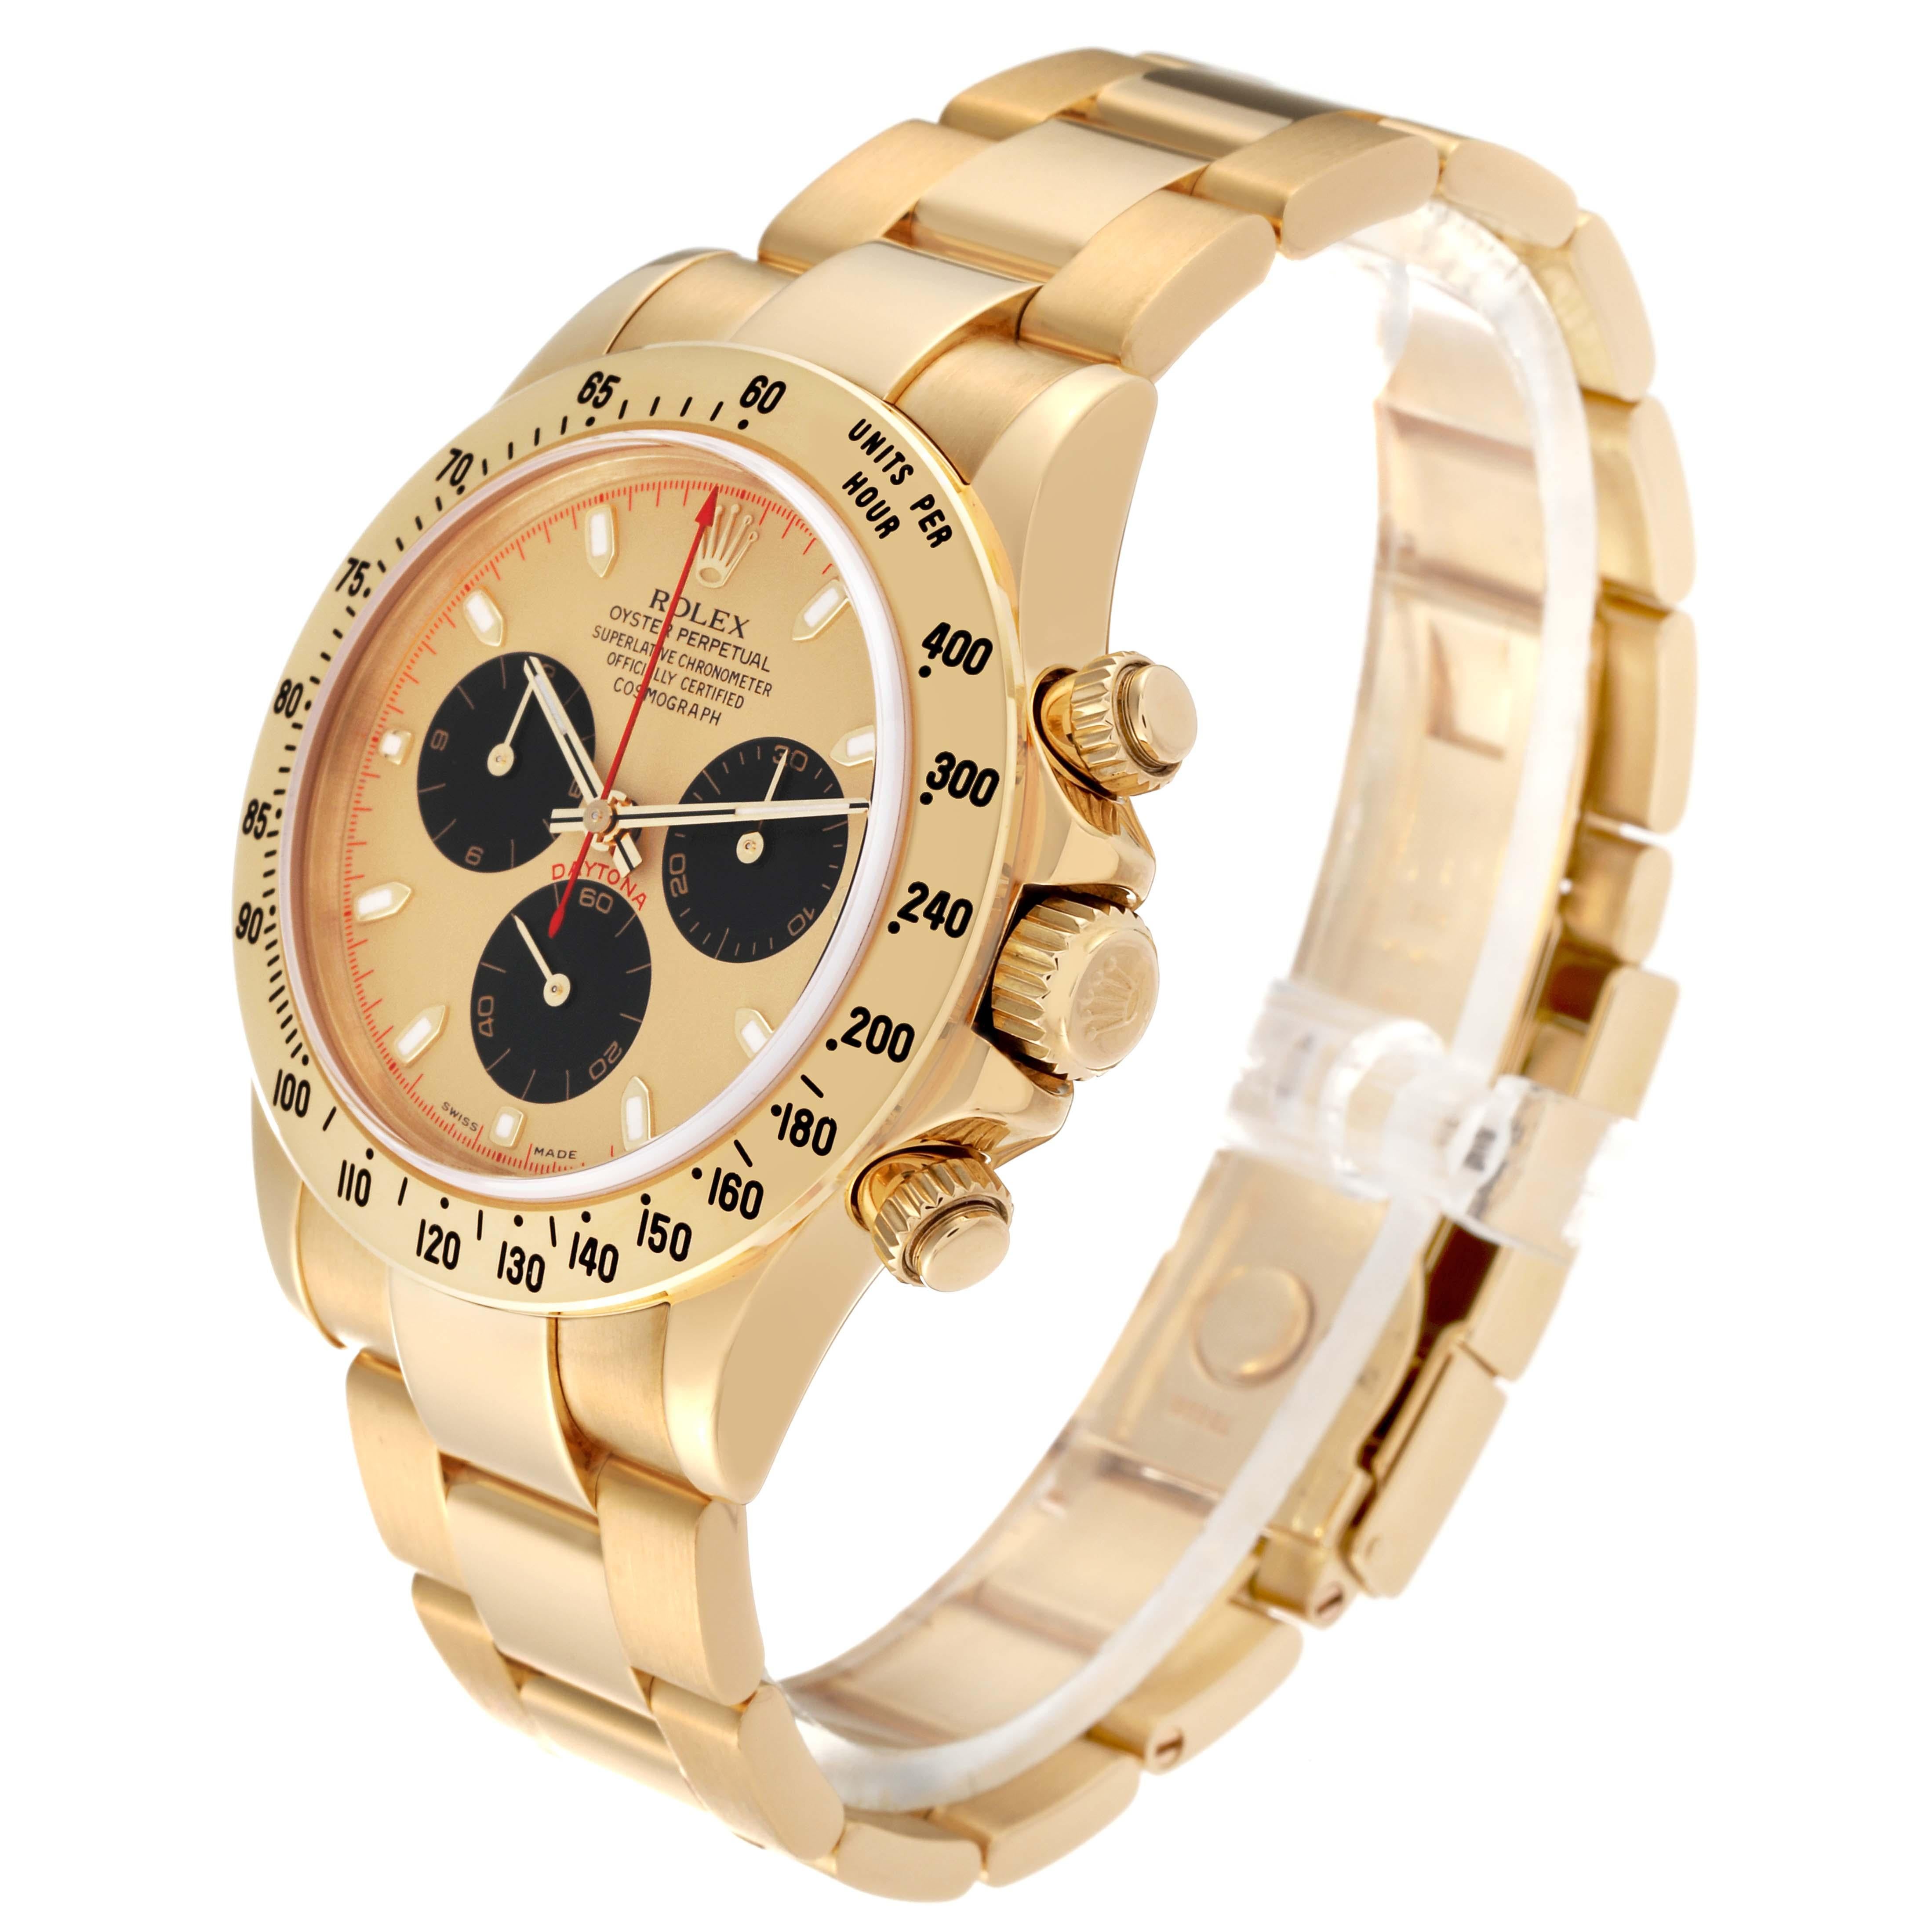 Rolex Daytona Yellow Gold Champagne Dial Mens Watch 116528 Box Papers For Sale 1